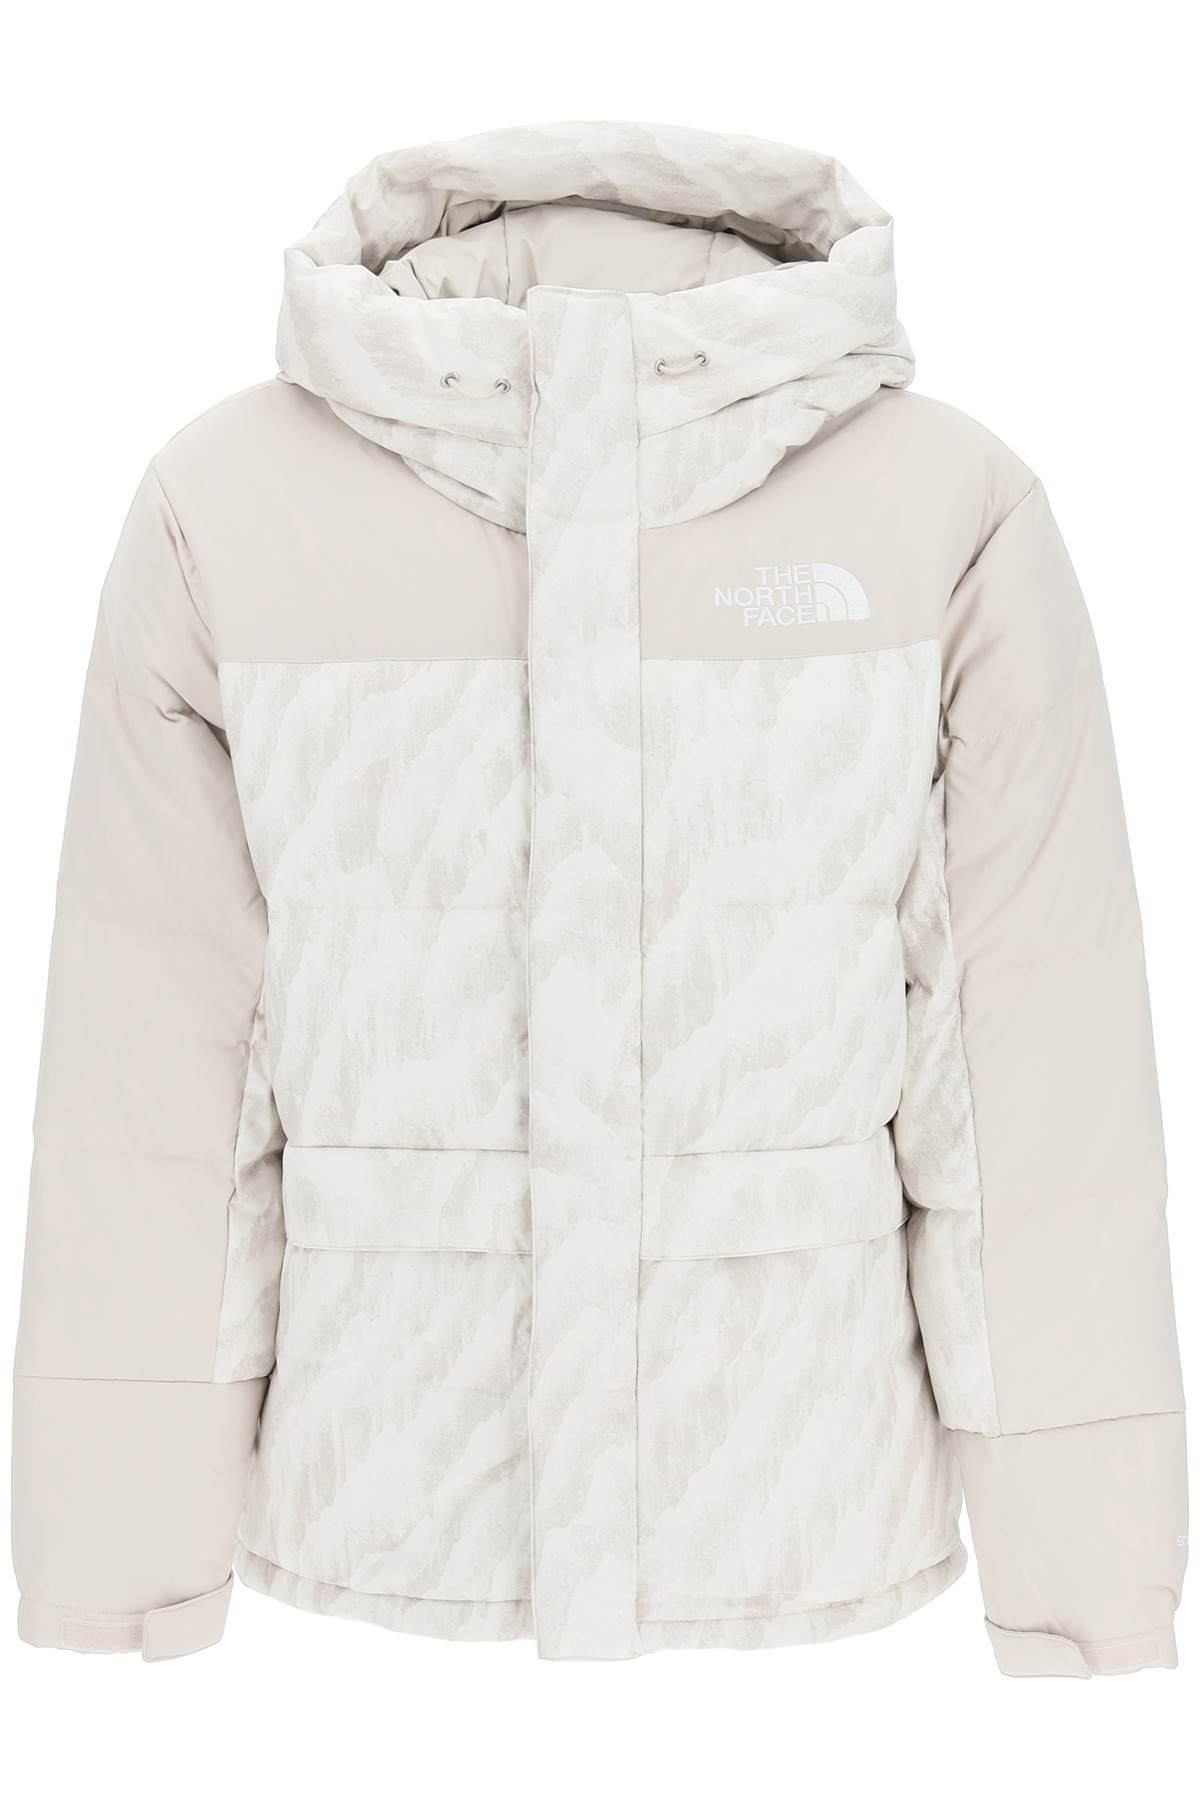 The North Face Himalayan Hooded Down Jacket